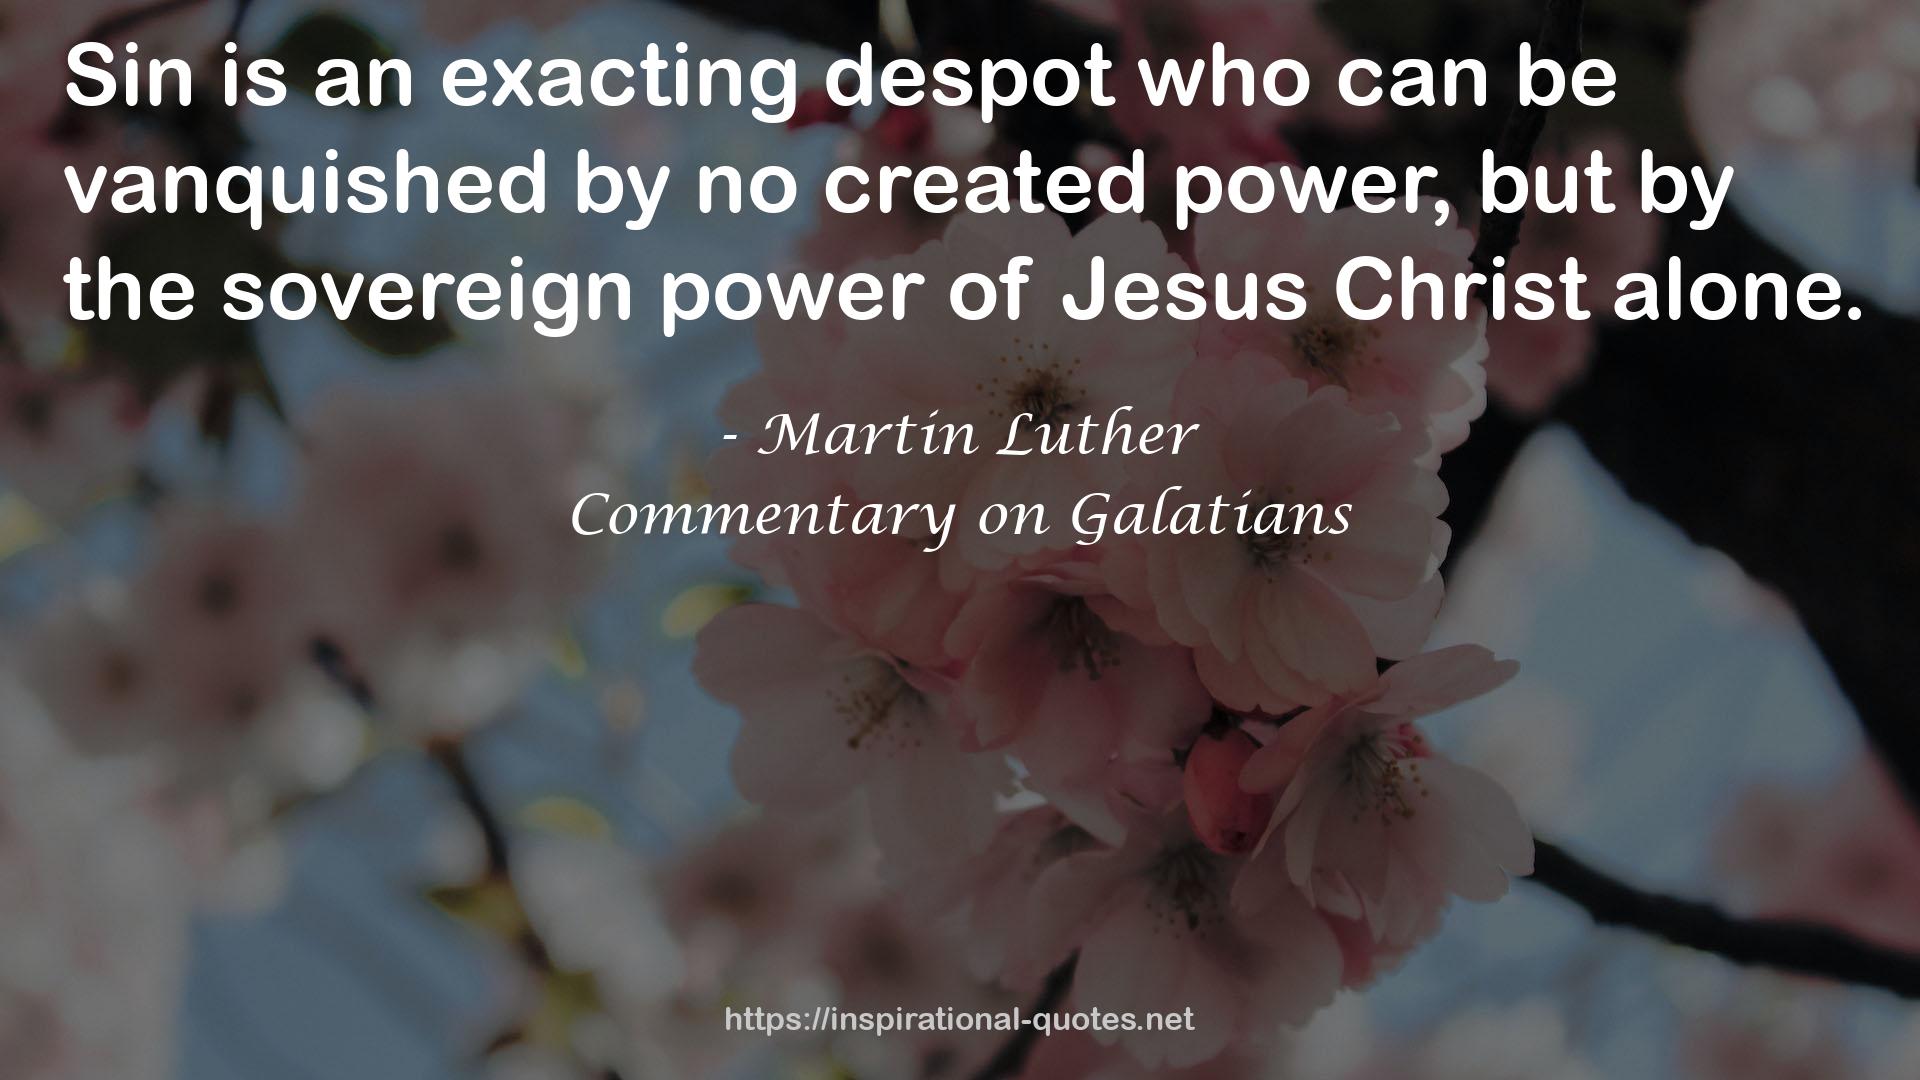 Commentary on Galatians QUOTES